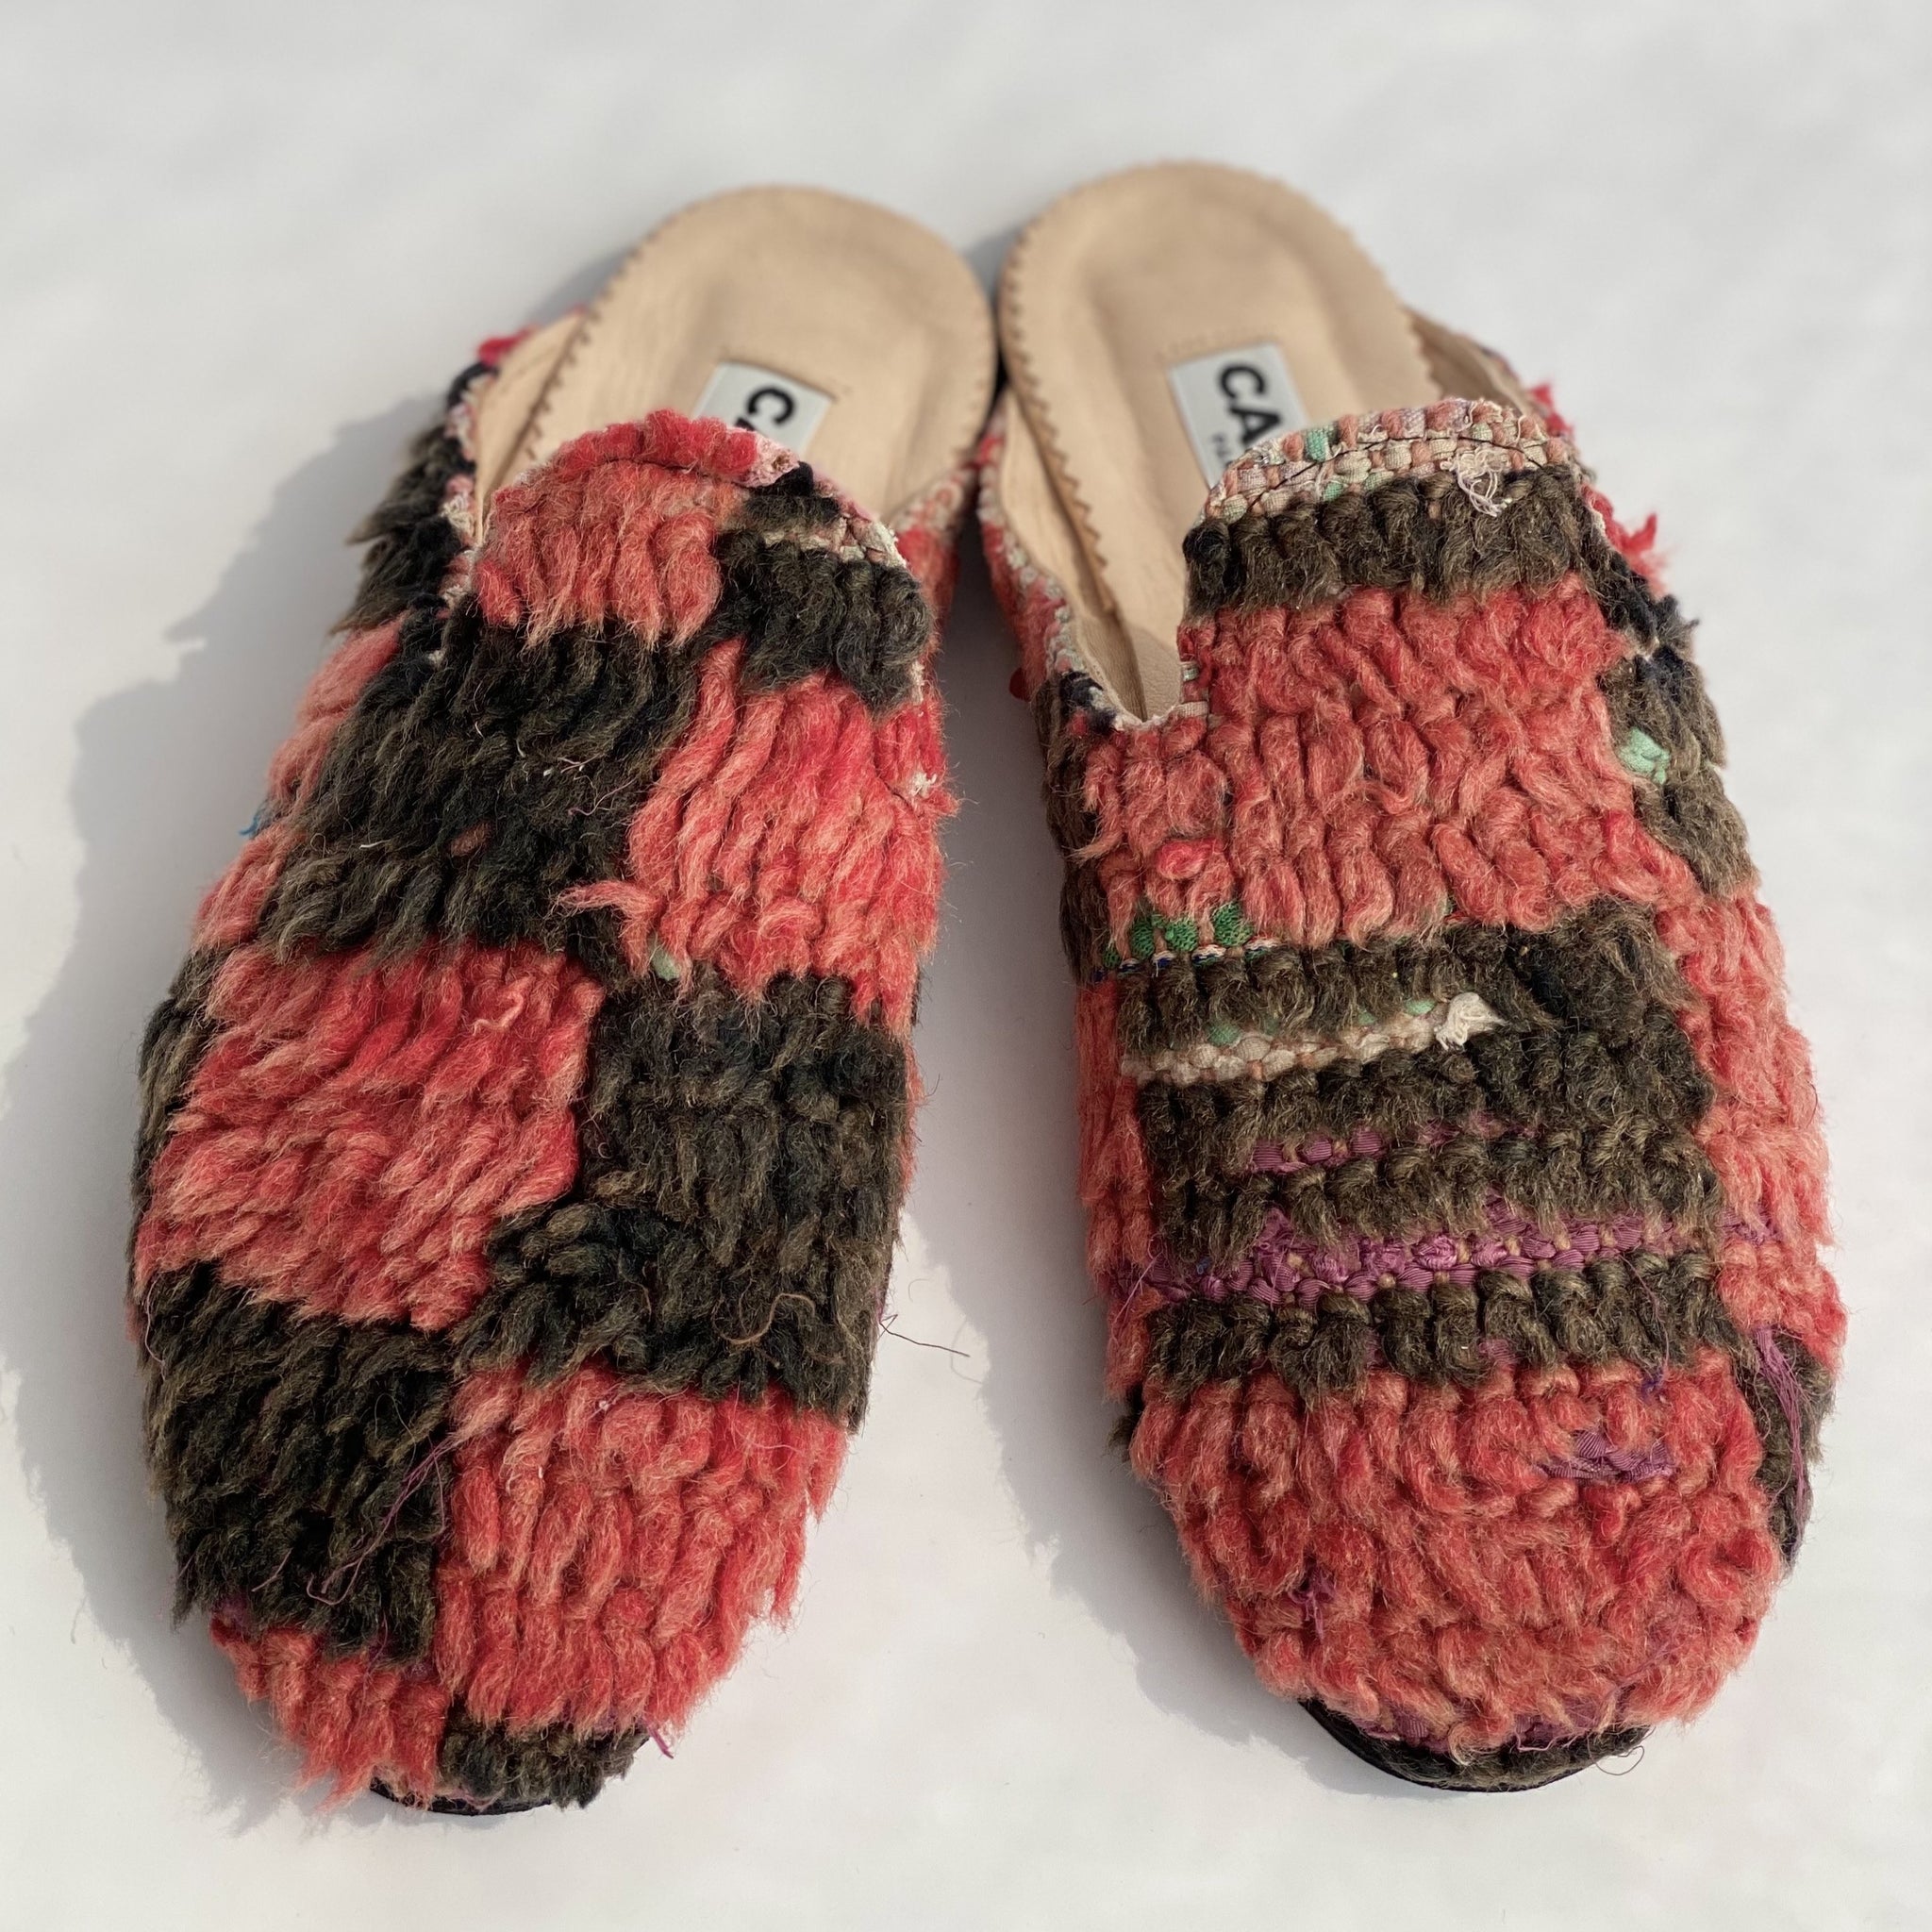 Beautiful handmade slippers handmade in Morocco from upcycled fabric.